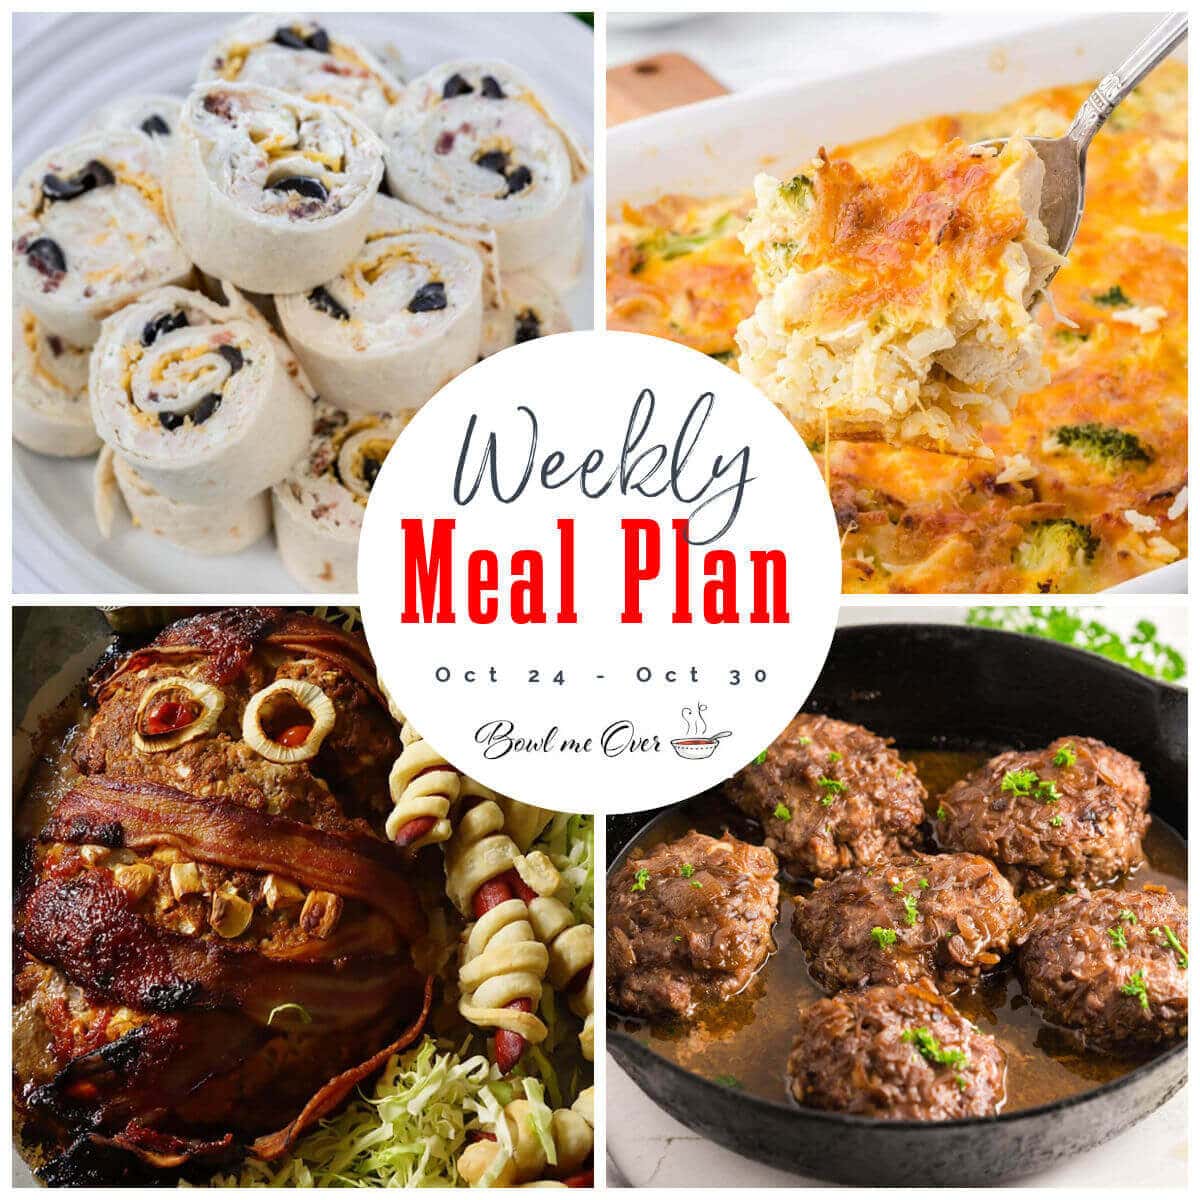 Collage of photos with pictures of recipes for Weekly Meal Plan 42. With print overlay.